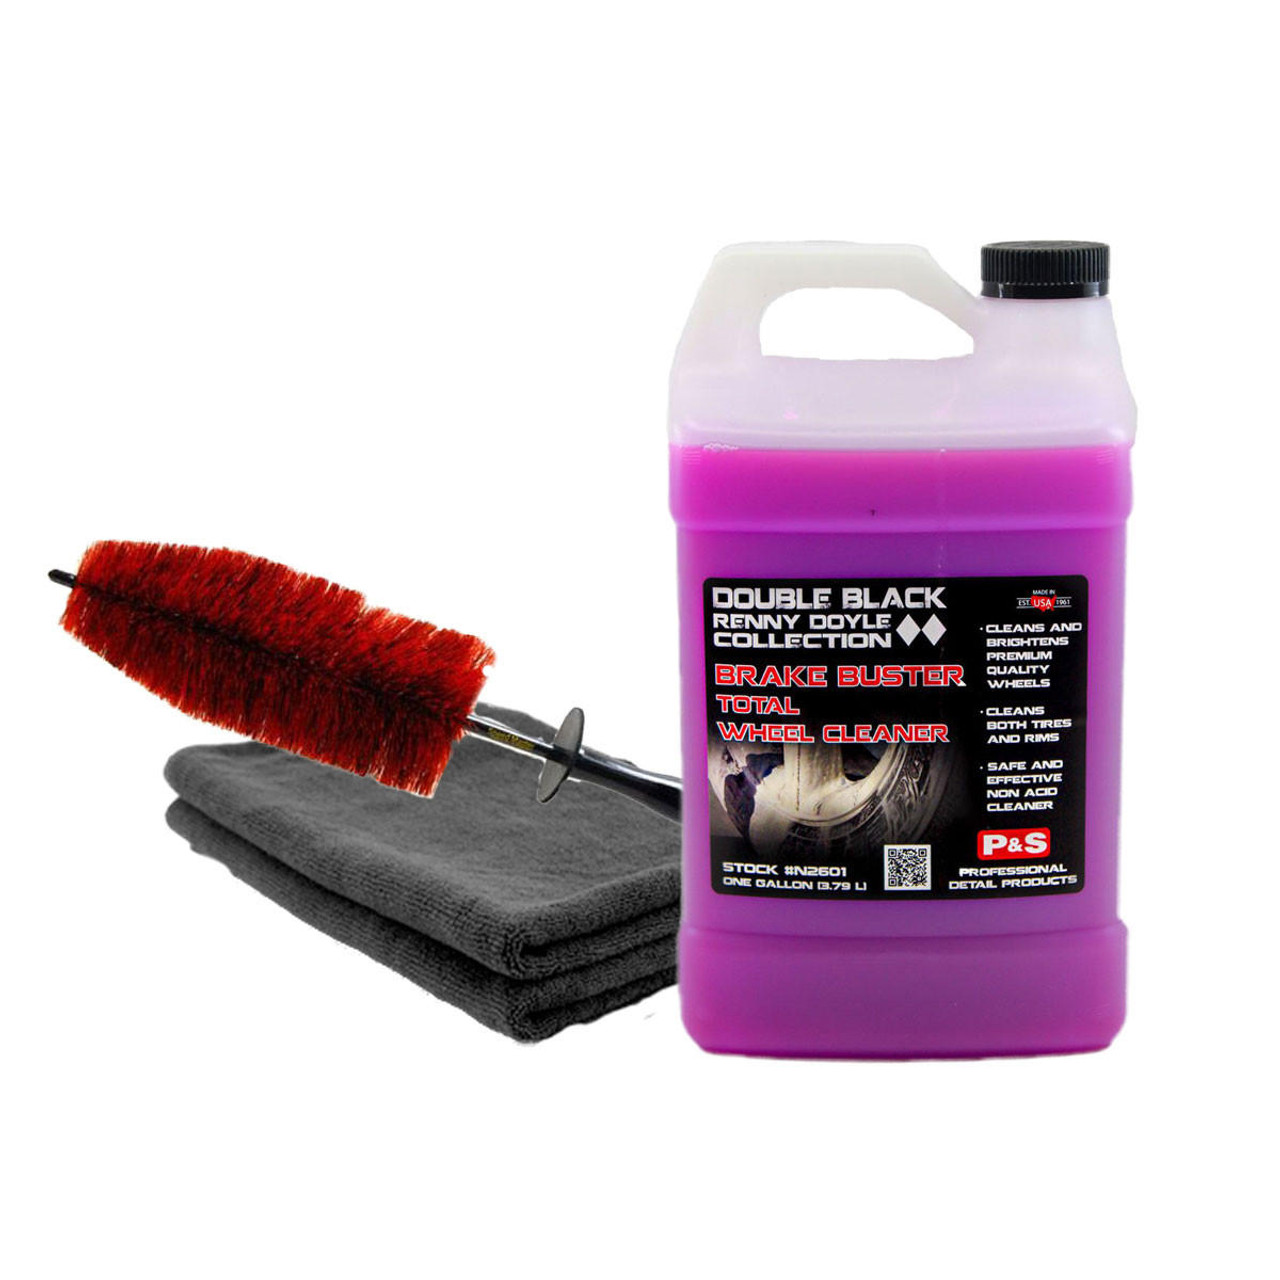 https://cdn11.bigcommerce.com/s-ndtdat03b2/images/stencil/1280x1280/products/10893/17183/p-and-s-detailing-product-pands-brake-buster-and-brush-kit__57108.1663863458.jpg?c=1